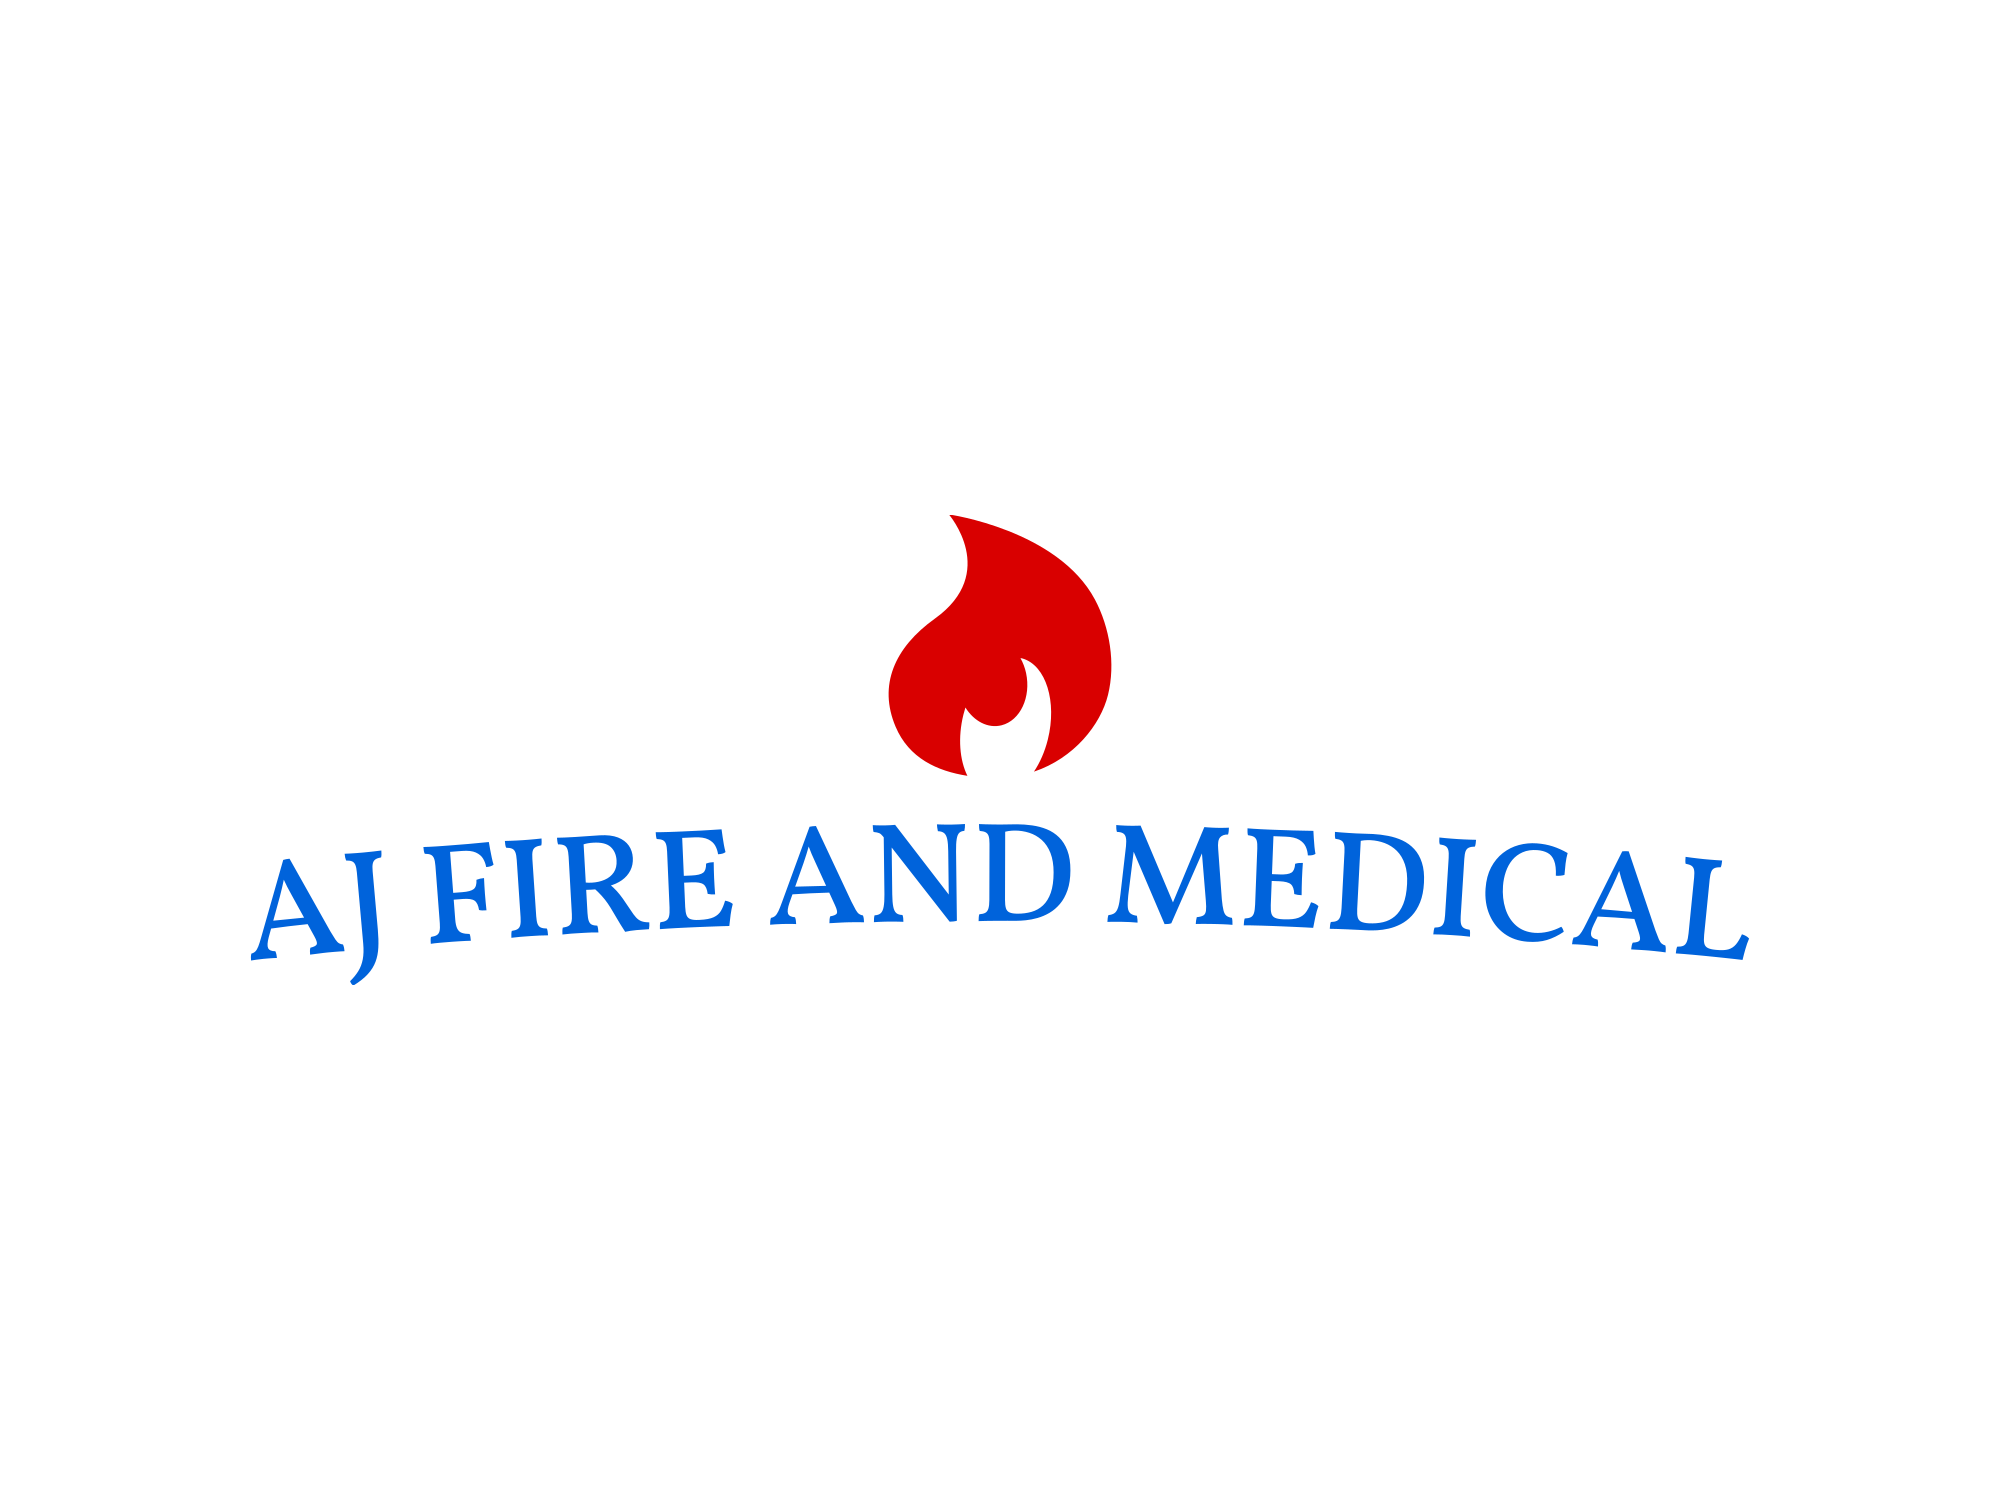 AJ Fire and Medical